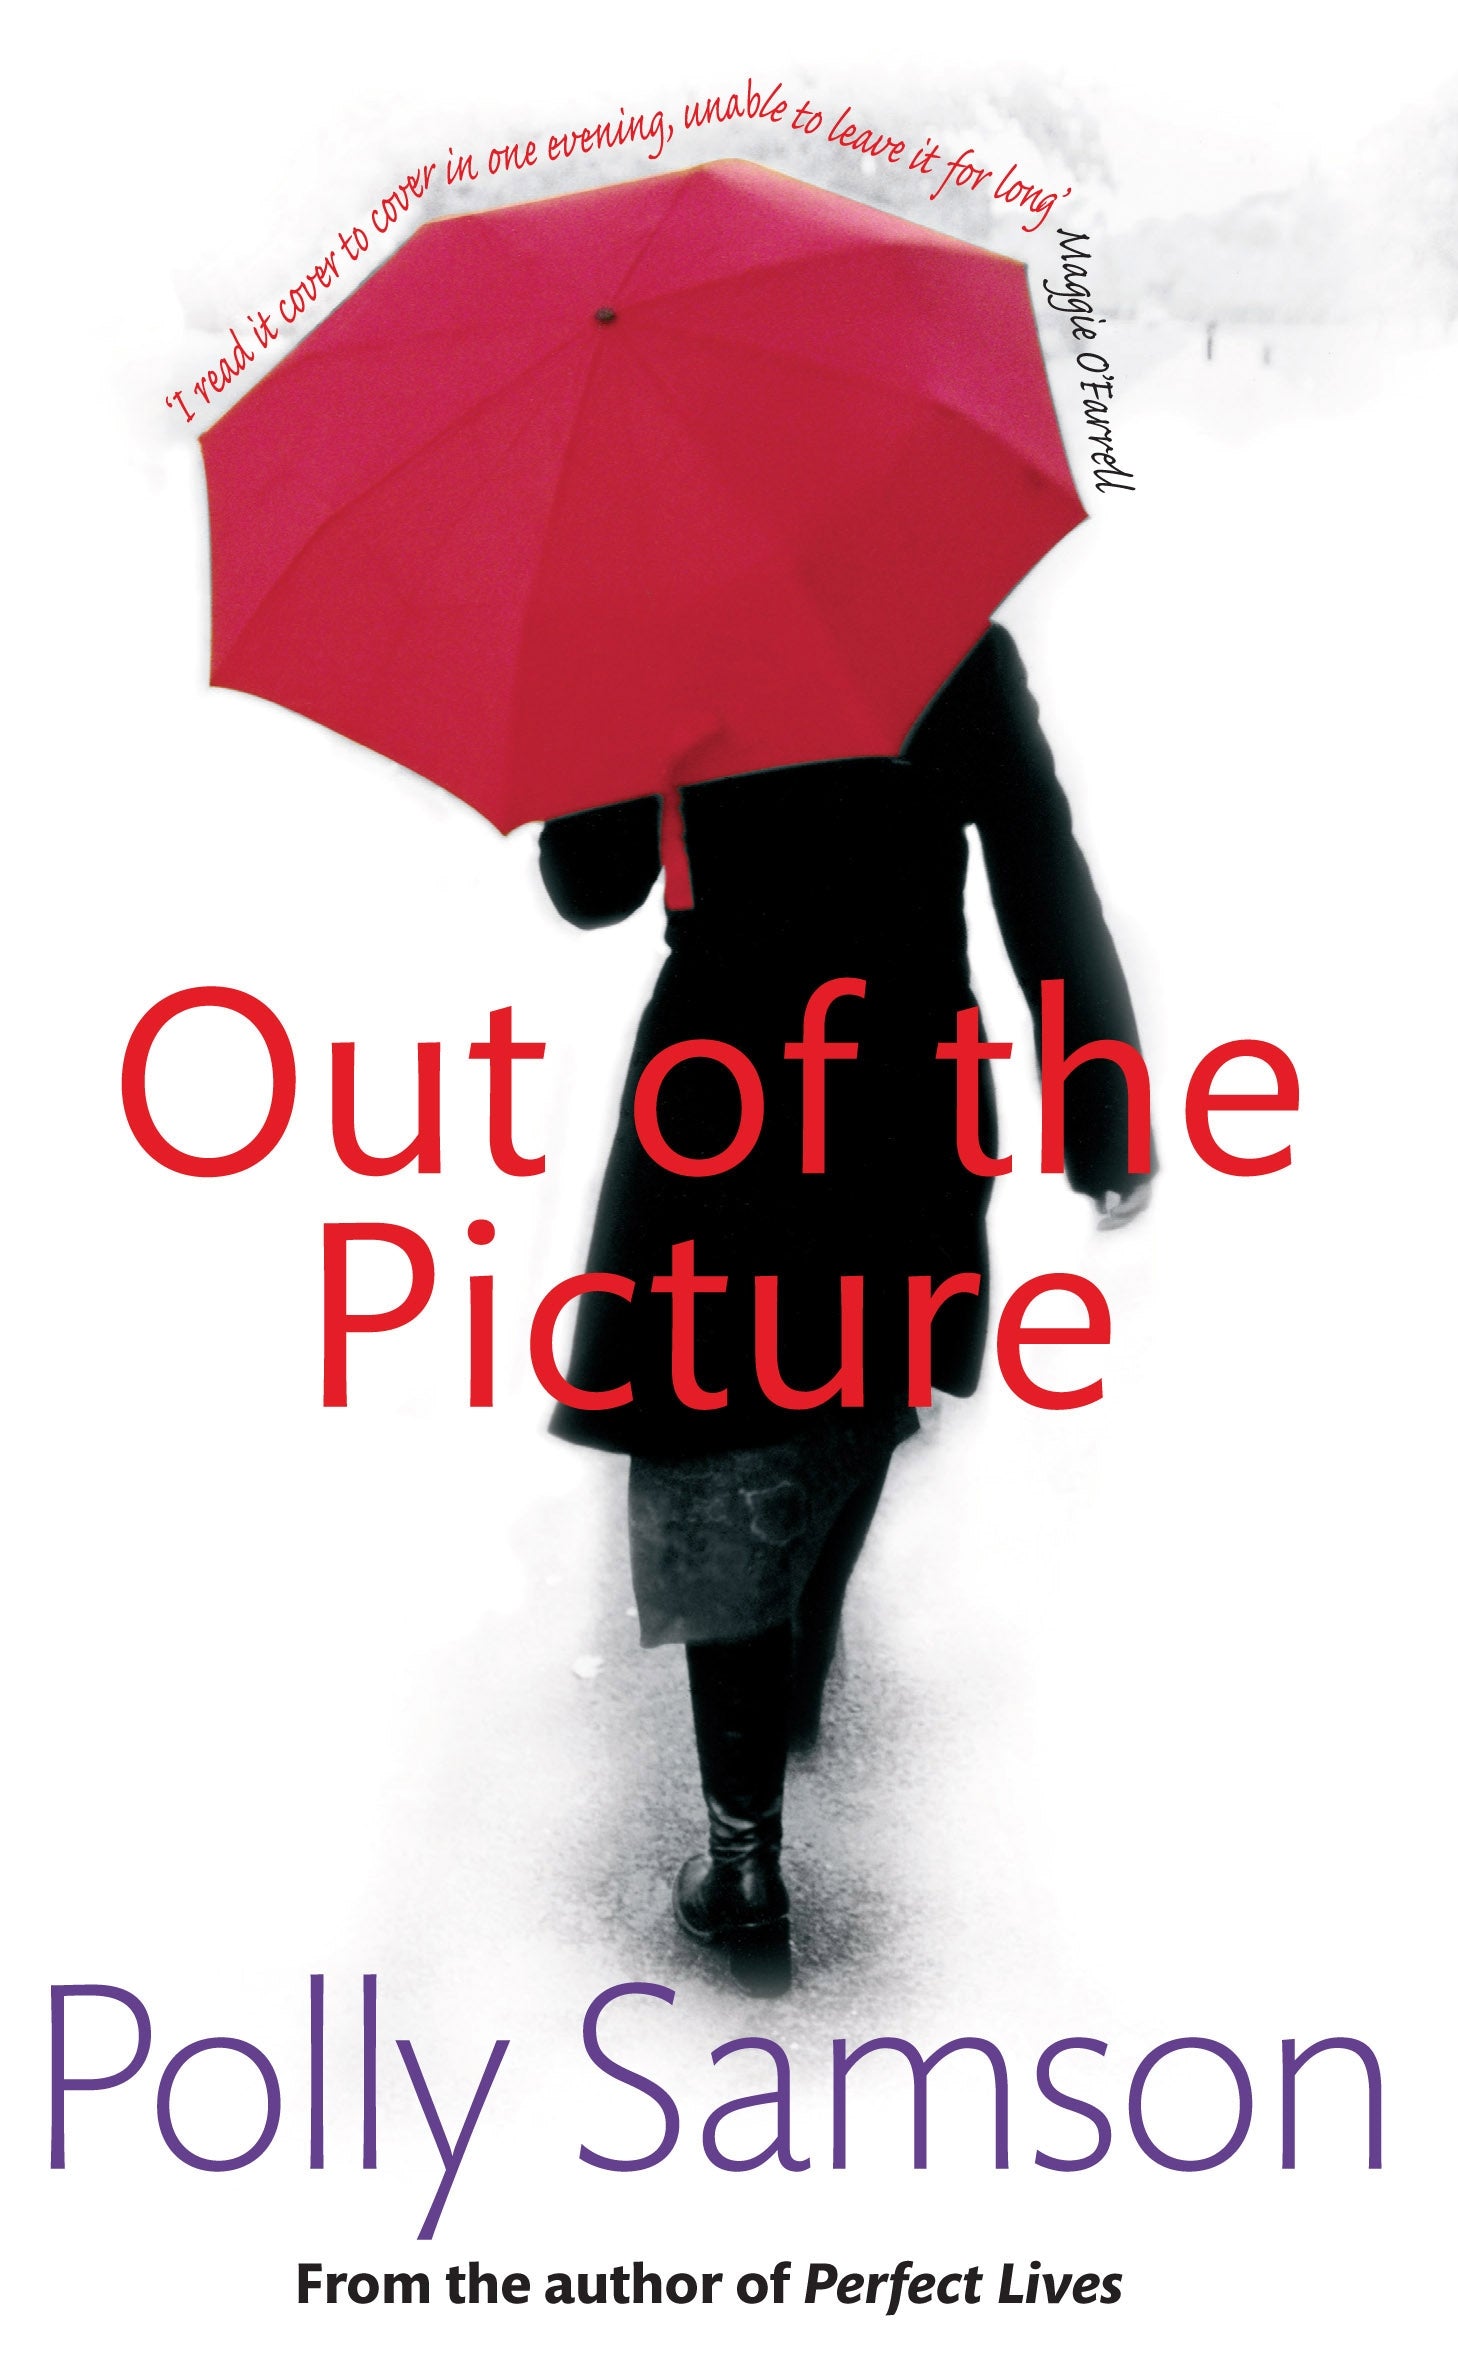 Out Of The Picture by Polly Samson